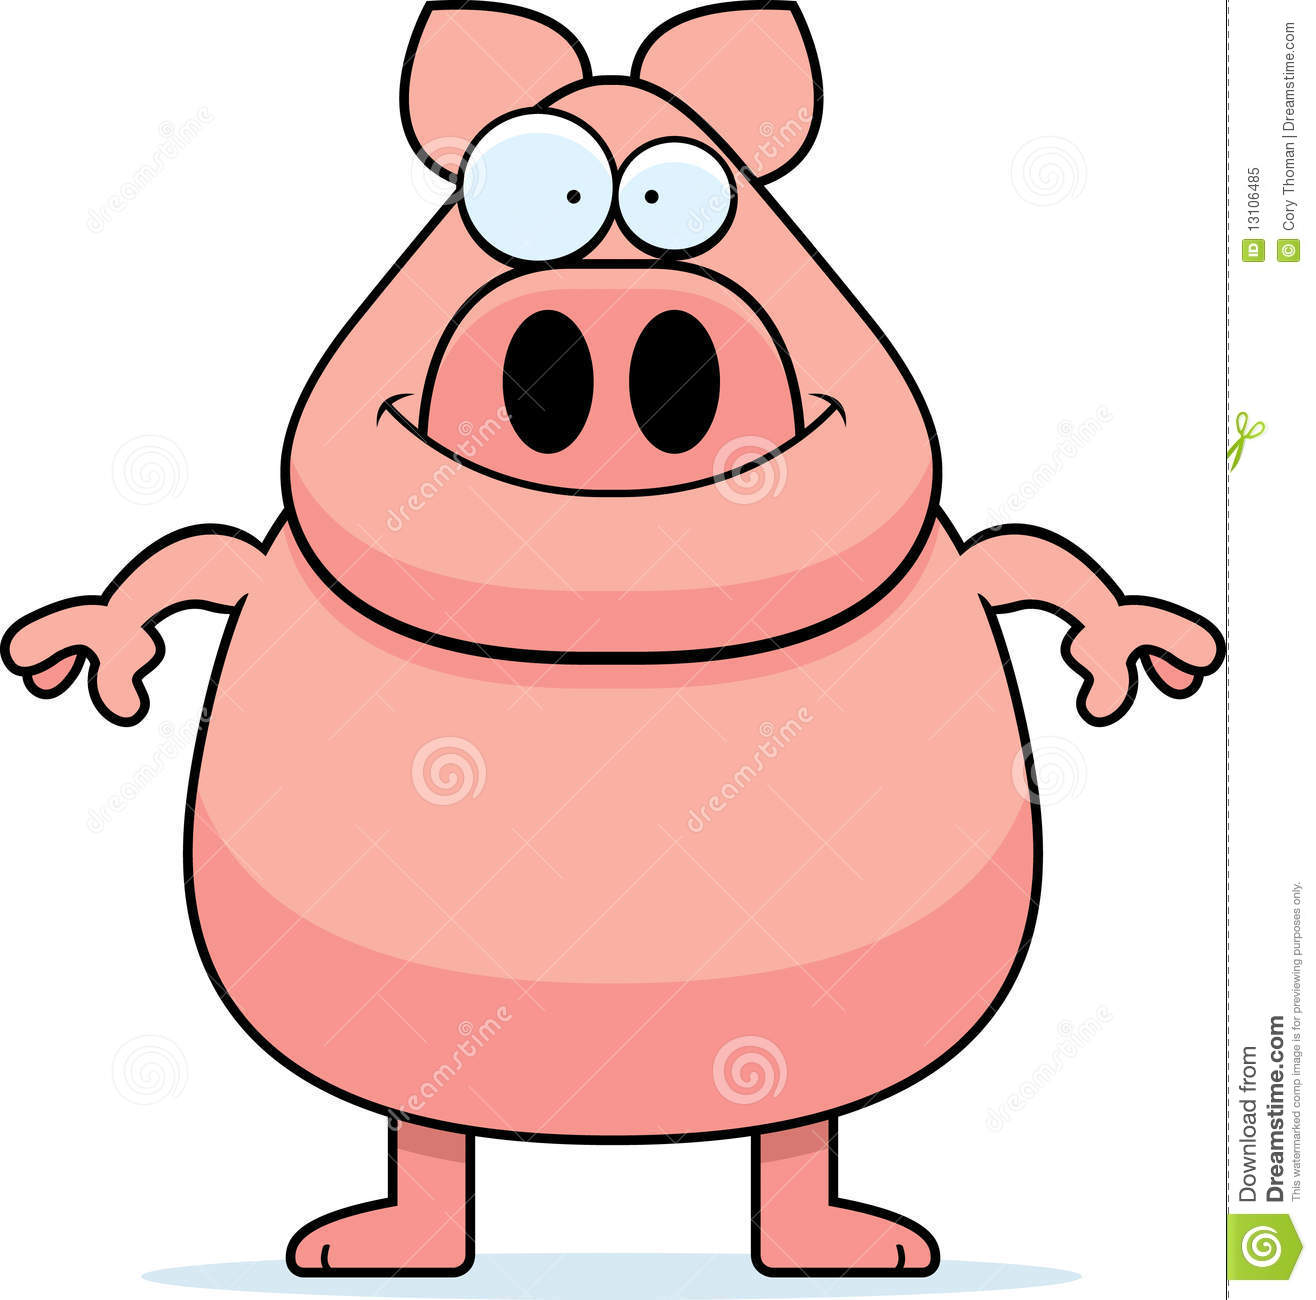 Cartoon Pig Standing Up Clipart   Free Clip Art Images